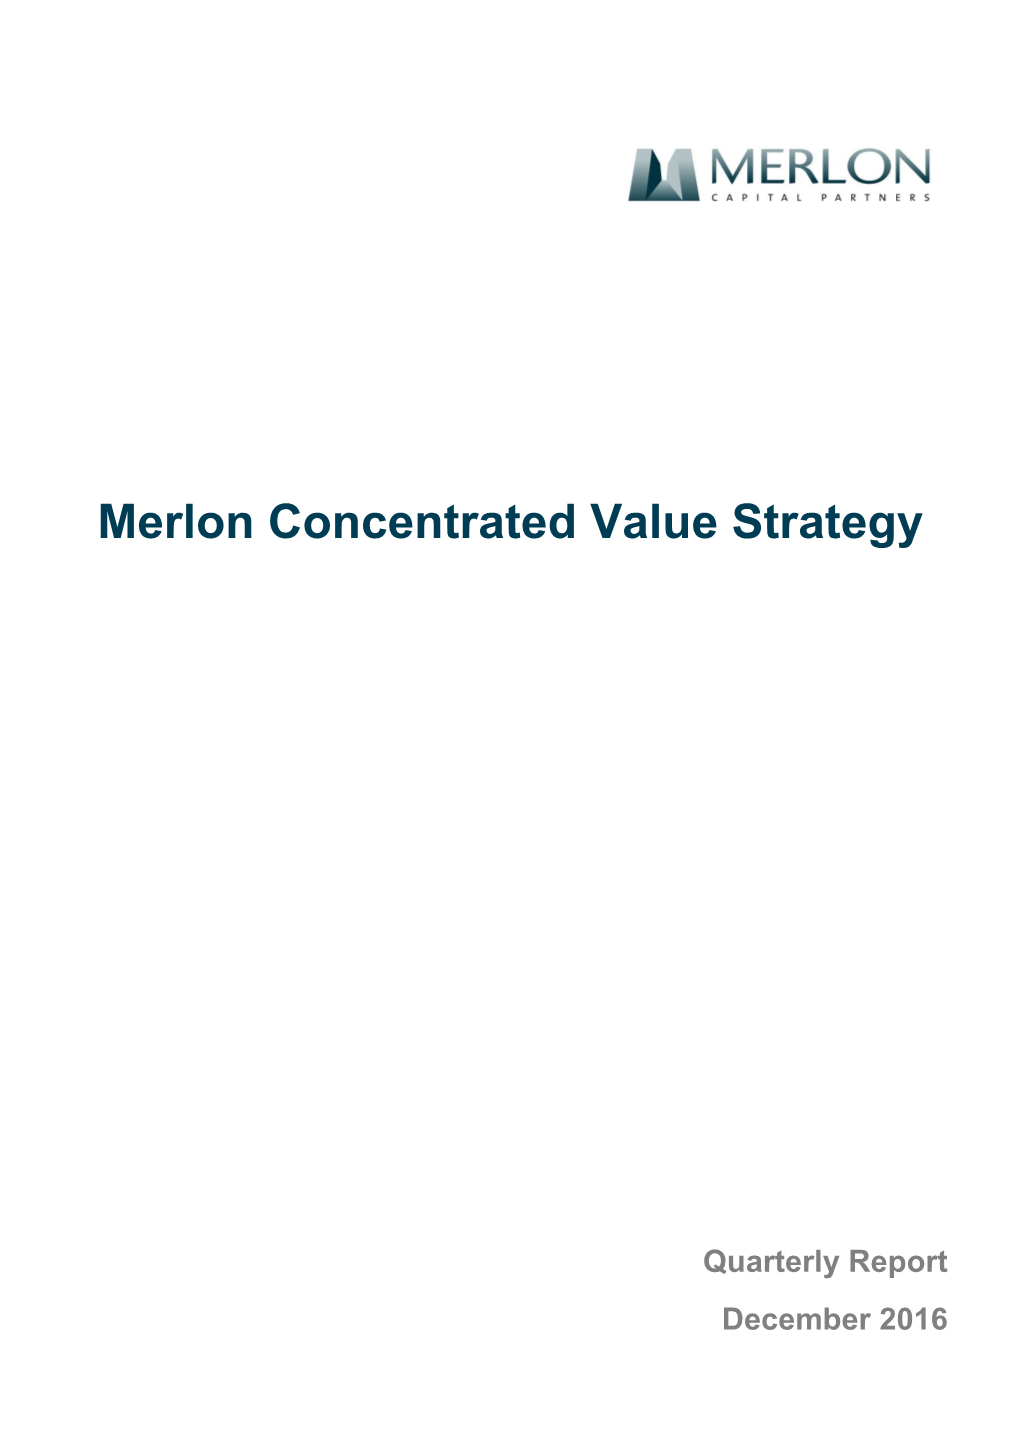 Merlon Concentrated Value Strategy